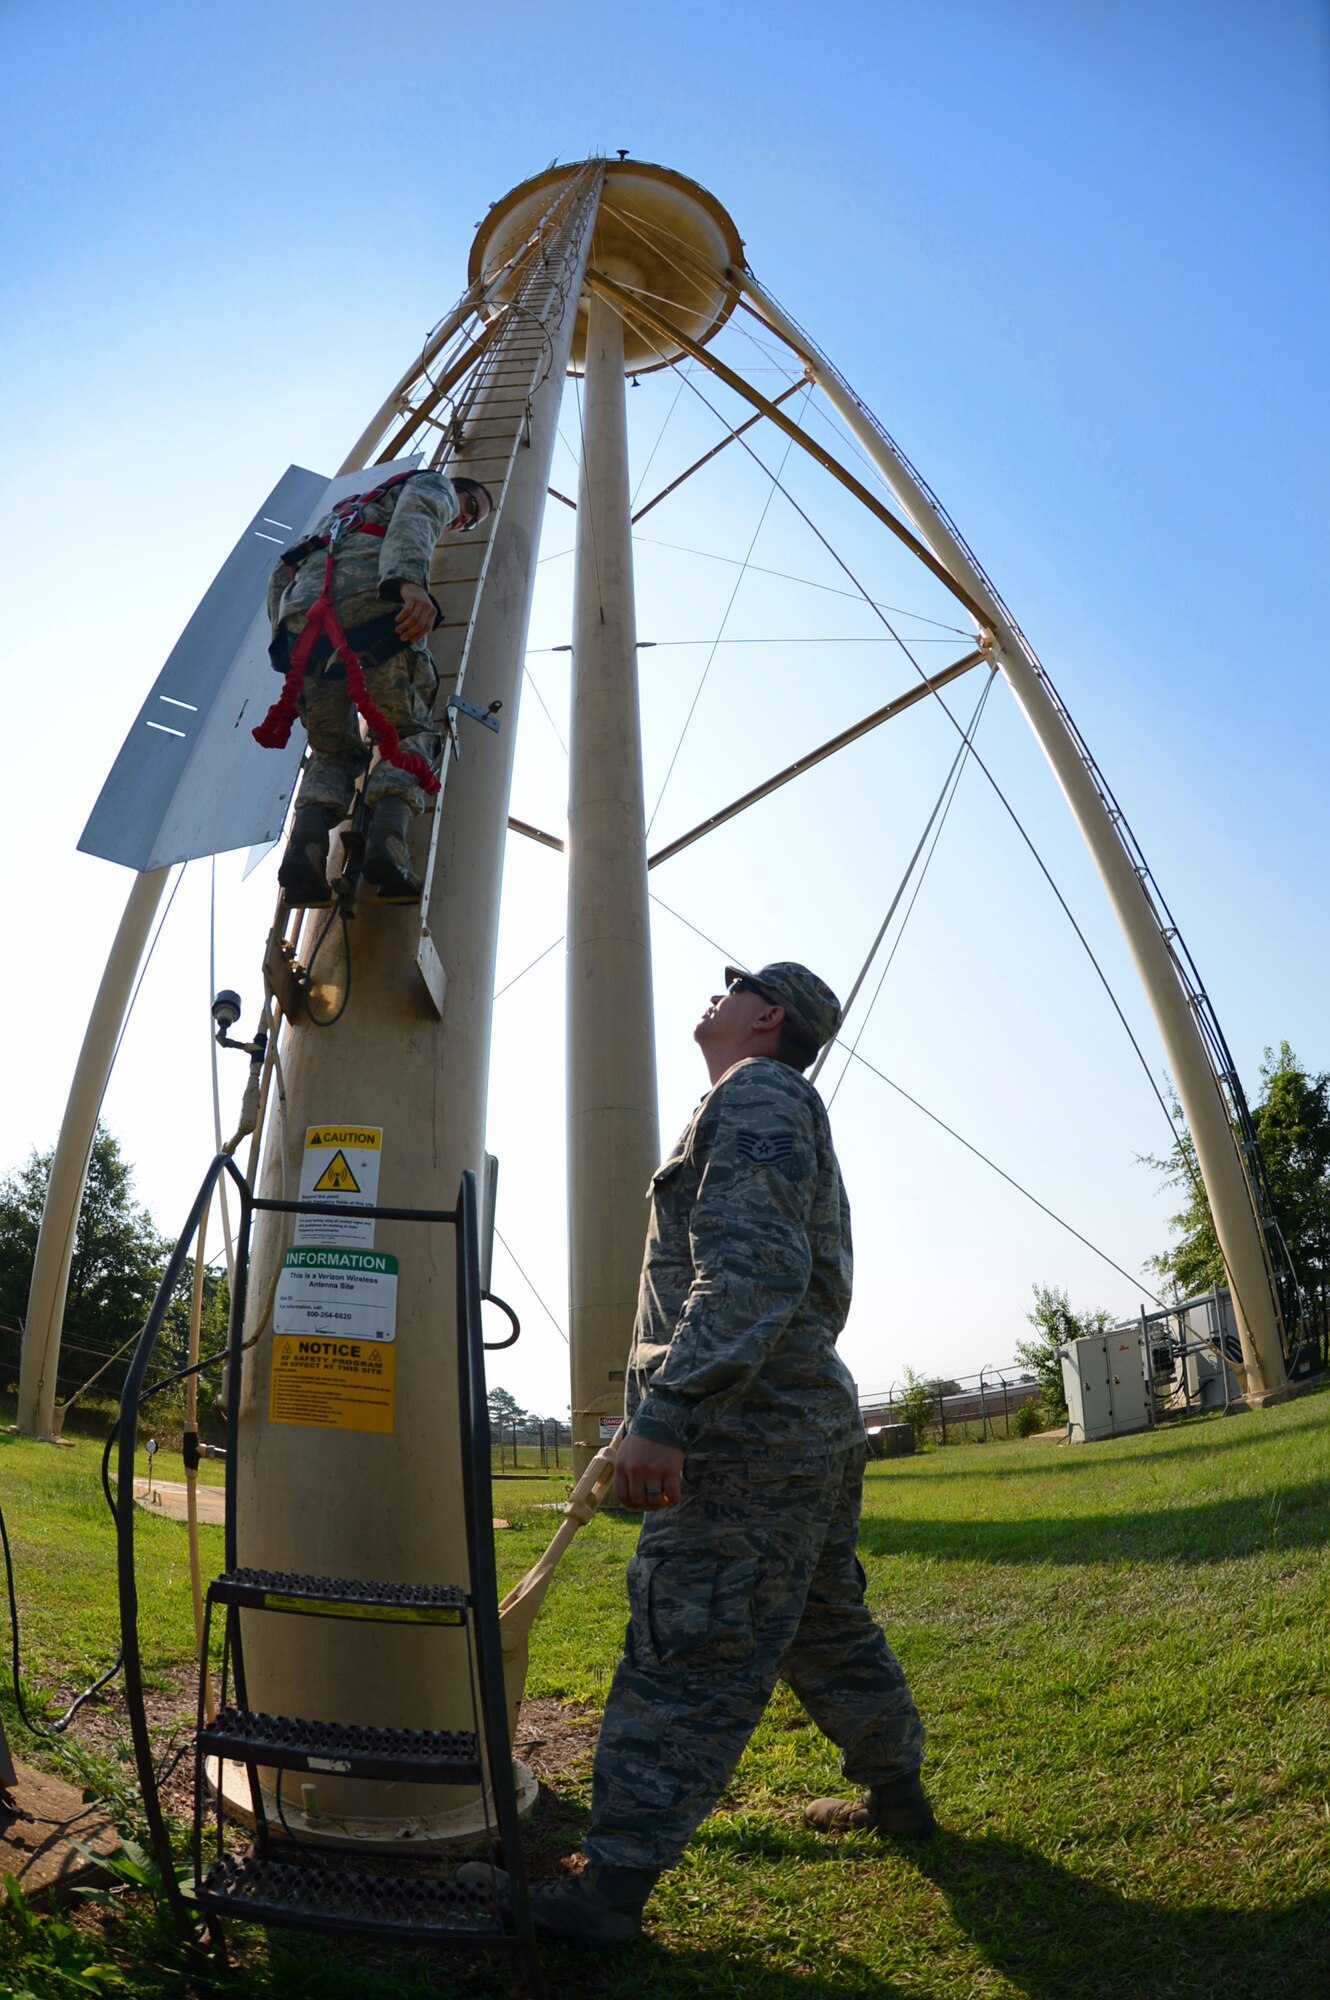 U.S. Air Force Staff Sgt. Phillip Coley, 20th Civil Engineer Squadron water and fuels systems maintenance craftsman, hooks onto a water tower ladder while Staff Sgt. Brian Joki, 20th CES water operations supervisor, “spots” the ladder at Shaw Air Force Base, S.C., July 8, 2014. Coley climbed the 120 foot tower during a yearly maintenance inspection. (U.S. Air Force photo by Airman 1st Class Jensen Stidham/Released)